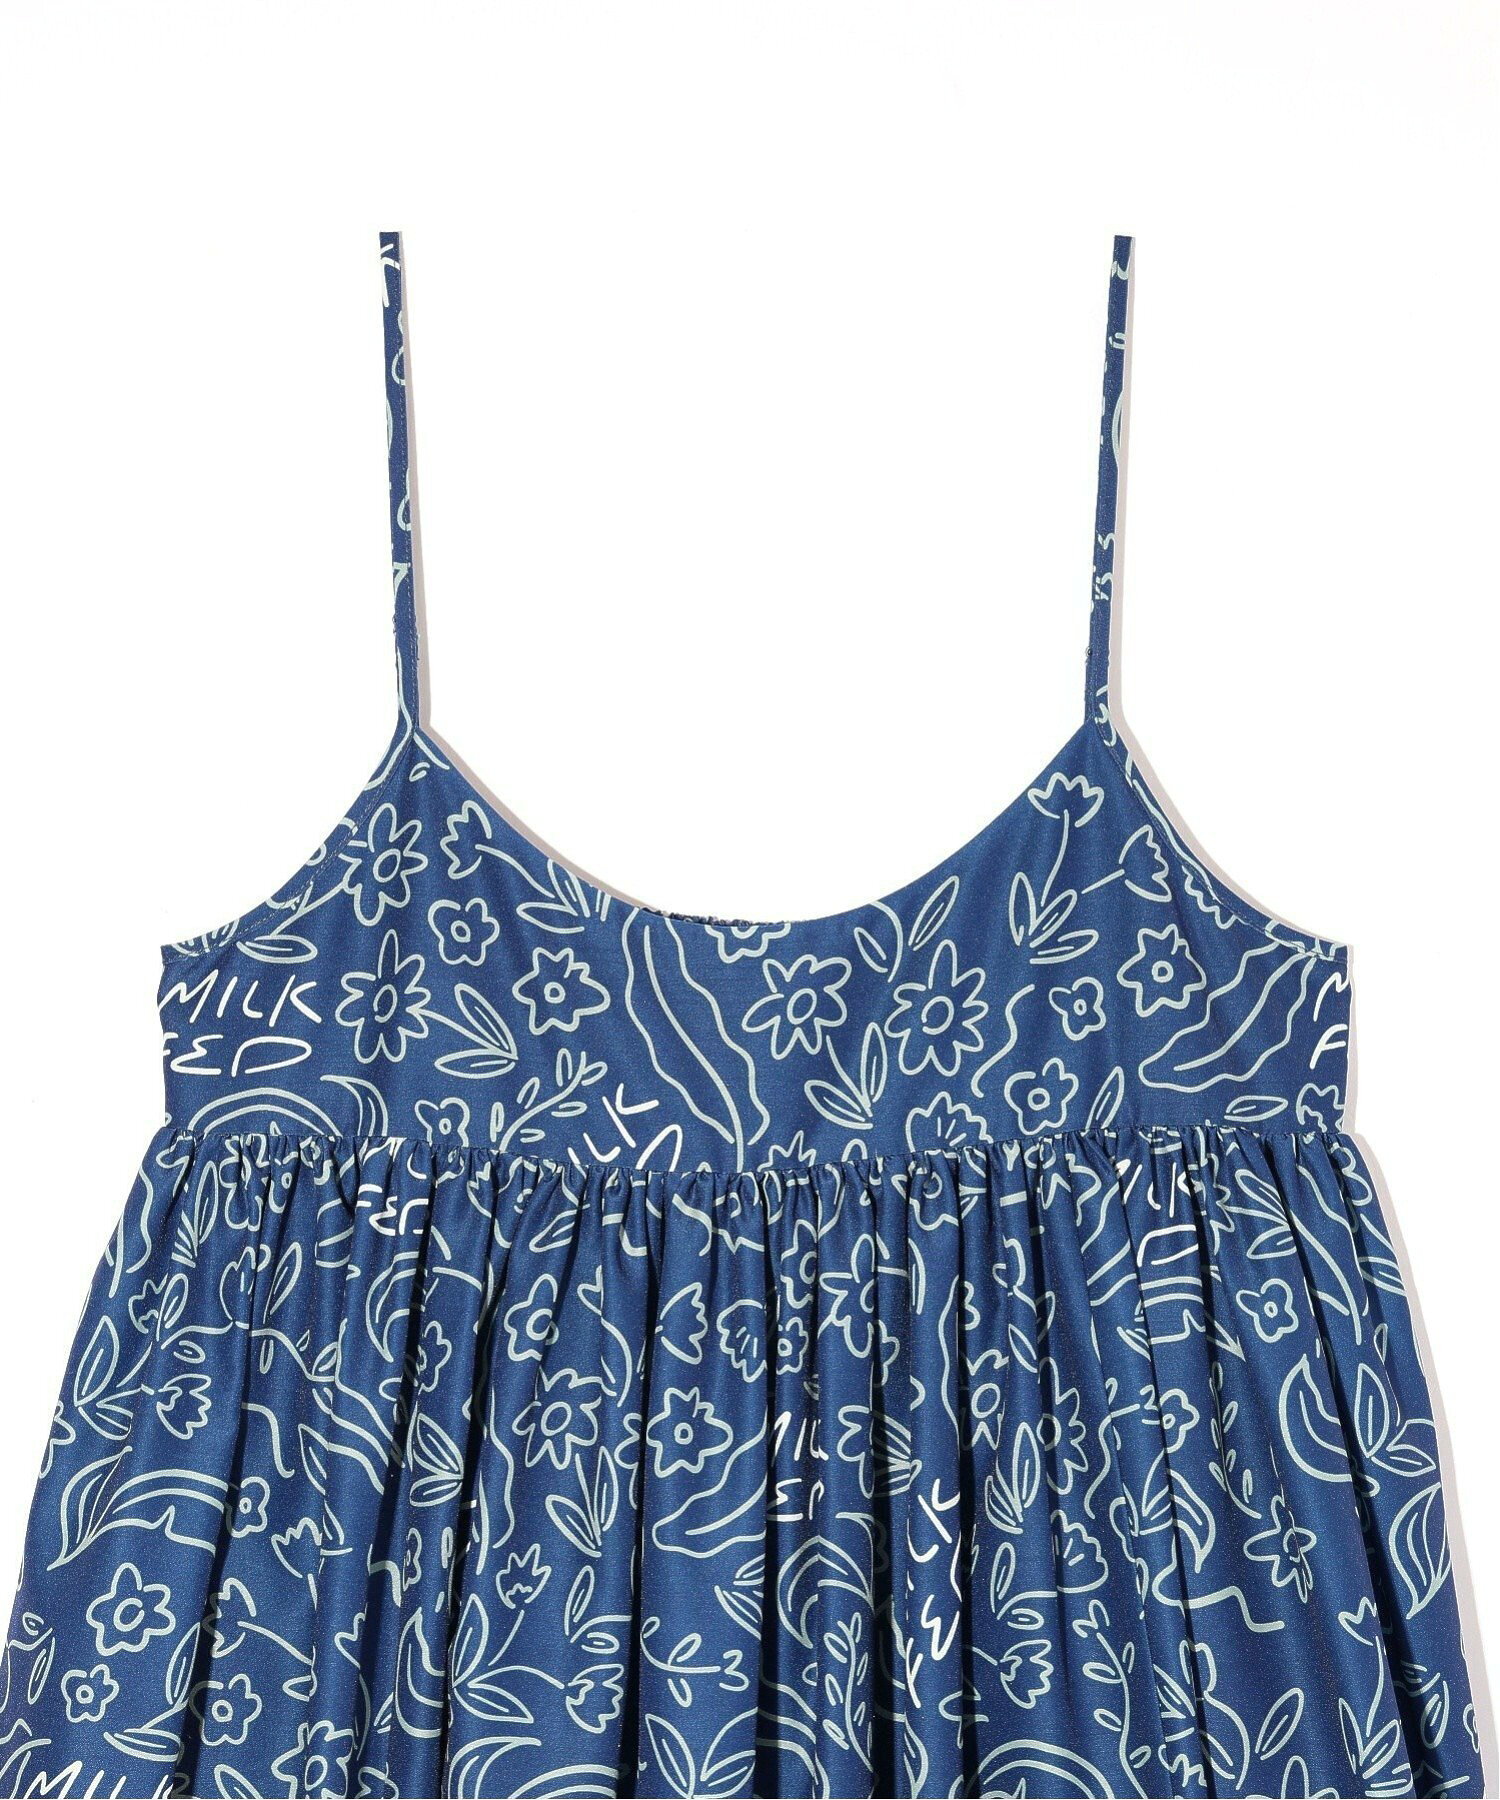 FLORAL CAMISOLE DRESS MILKFED.